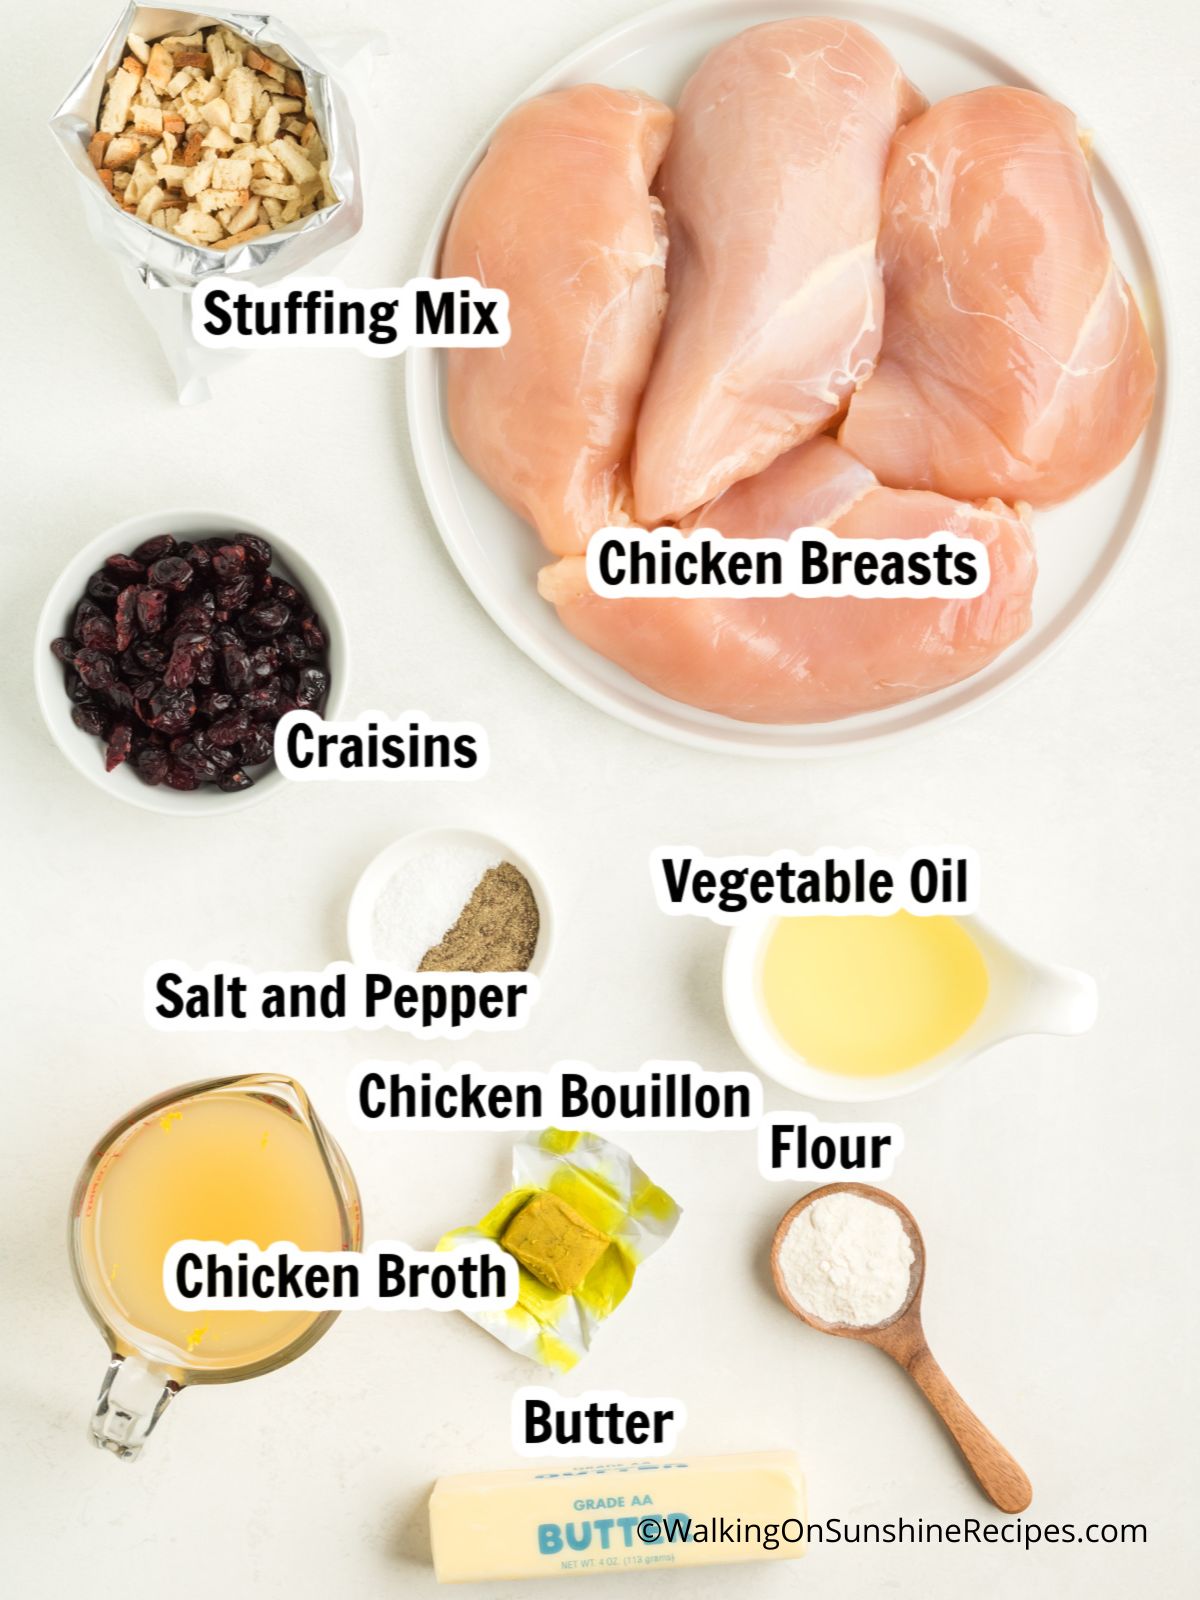 Ingredients for Stuffing Stuffed Chicken.